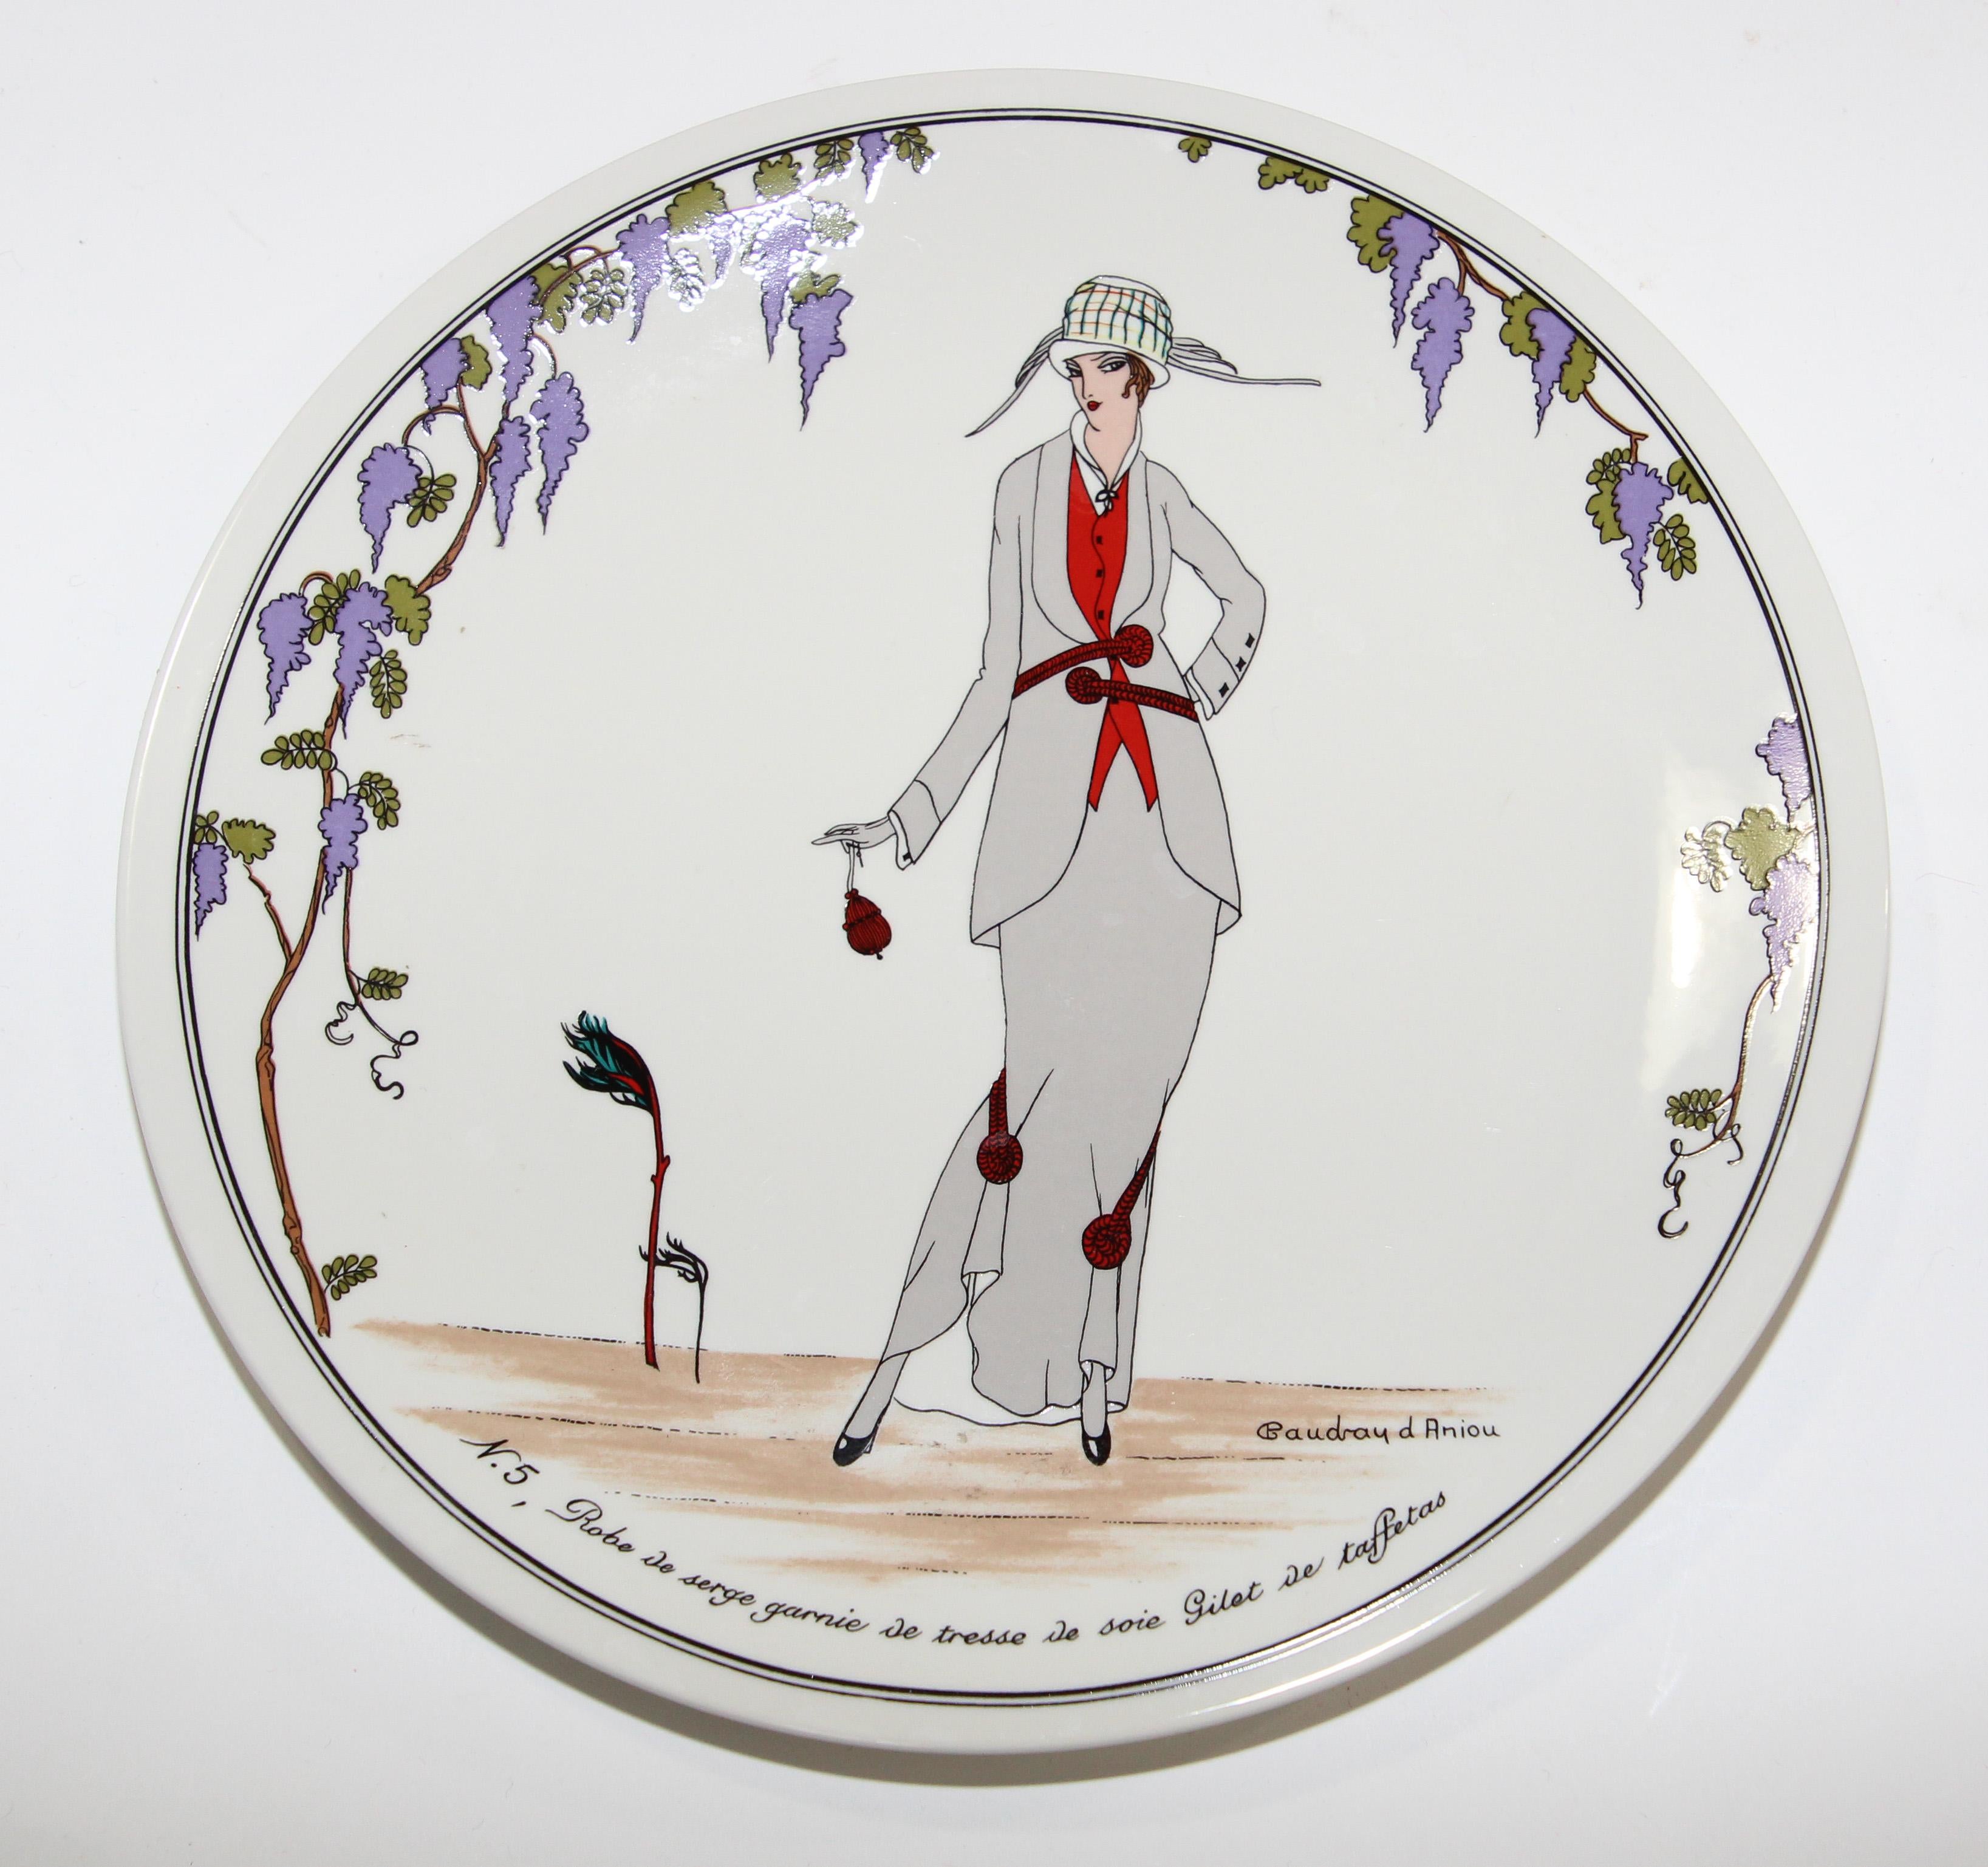 Vintage Villeroy and Boch China 1900 Art Deco design.
Collectible Villeroy & Boch Plates design 1900,
Villeroy & Boch Design 1900 Porcelain collection.
The subjects are taken from ancient lithographies and are signed by different artists.
Plate